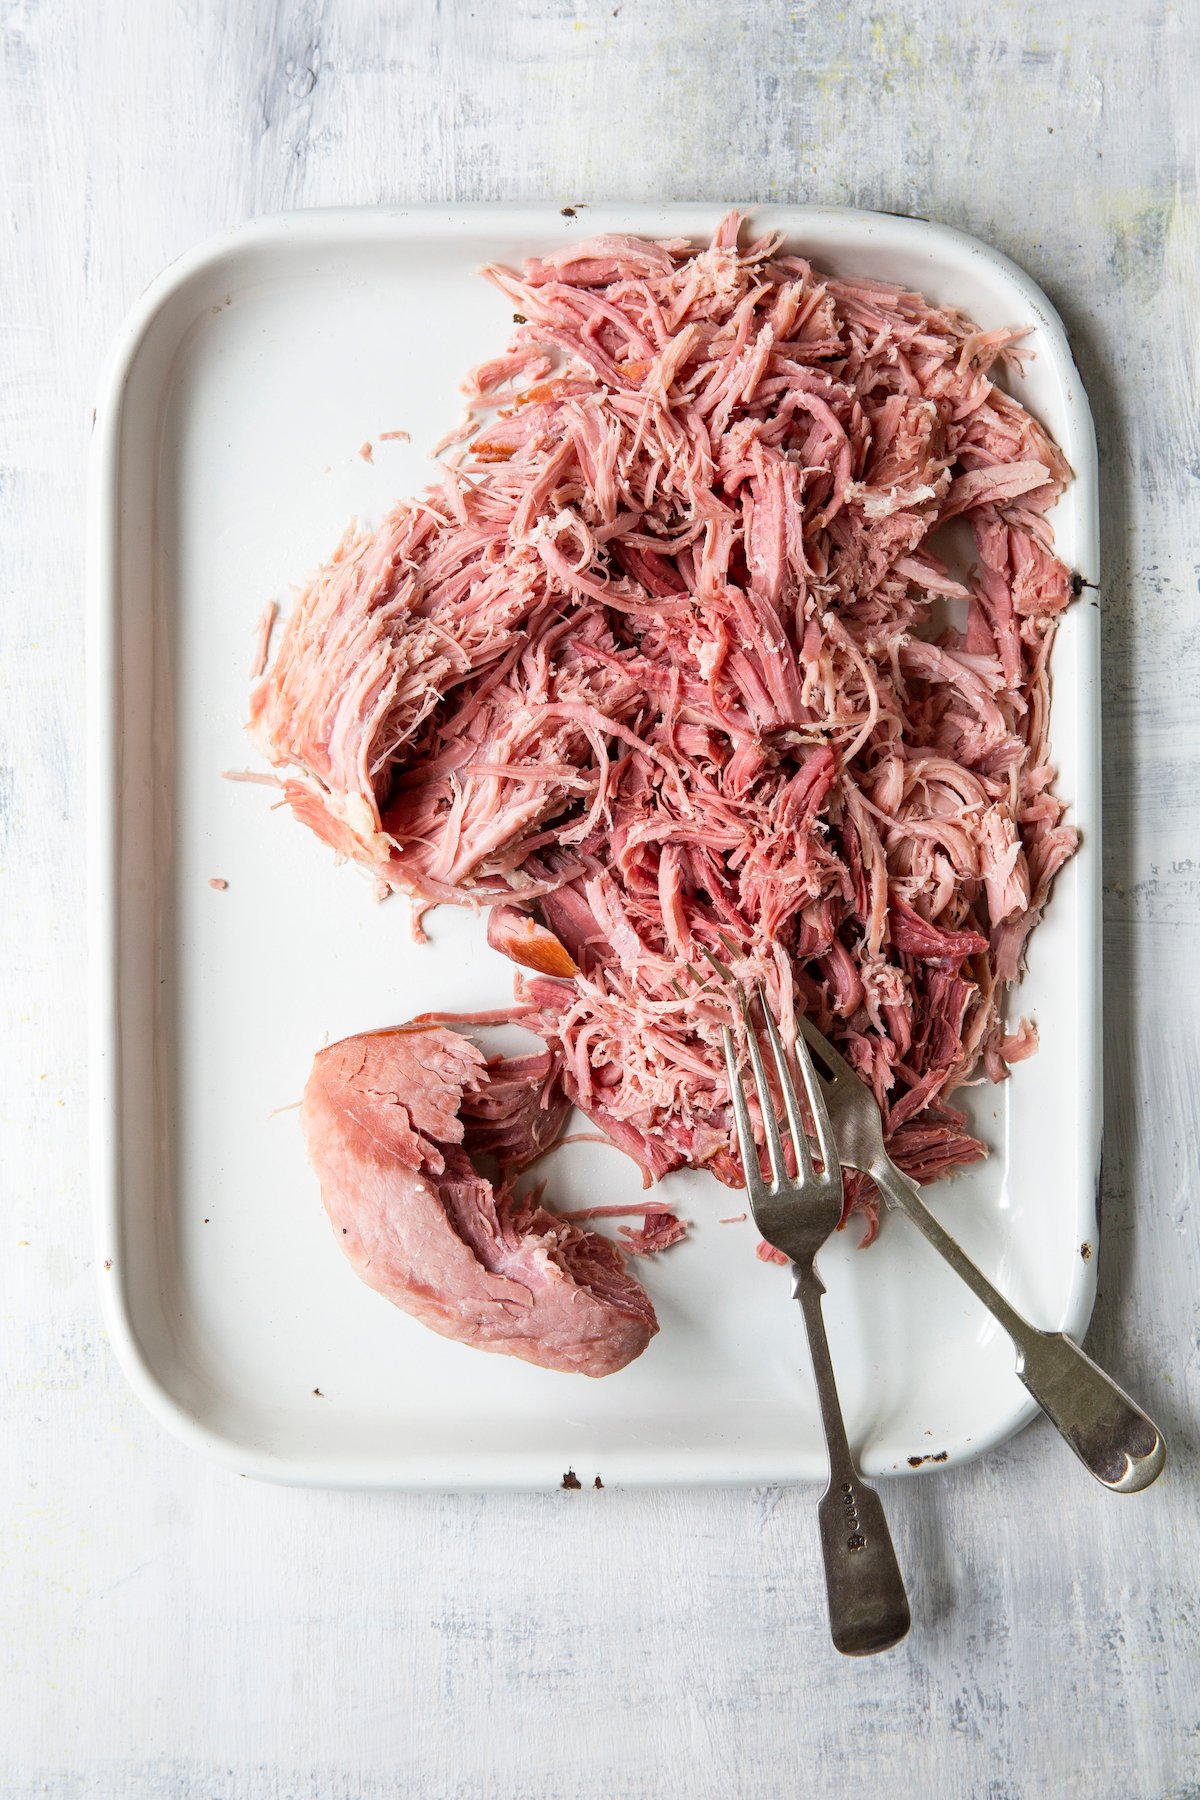 Overhead shot of ham being shredded on platter with two forks